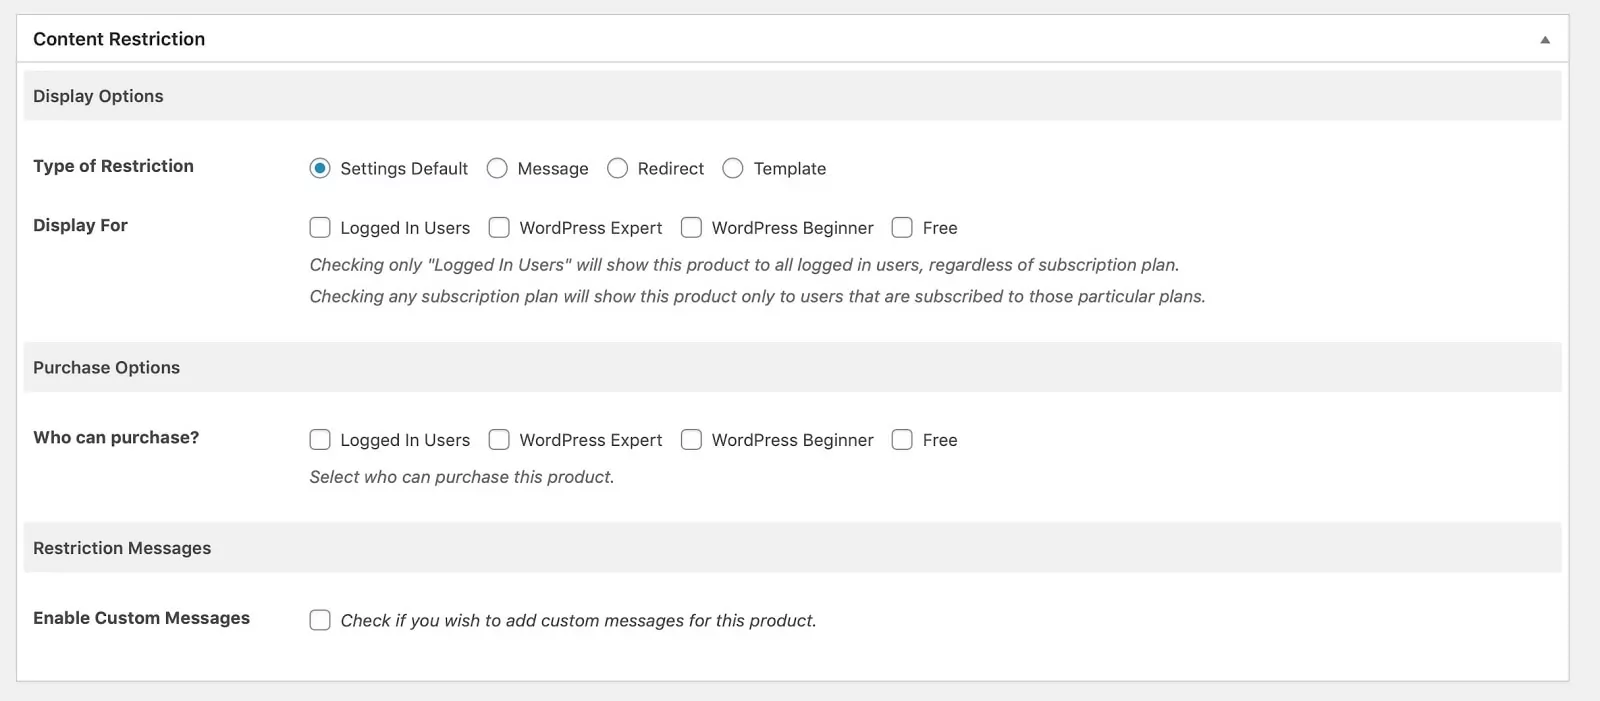 Screenshot of content restrictions for a WooCommerce product